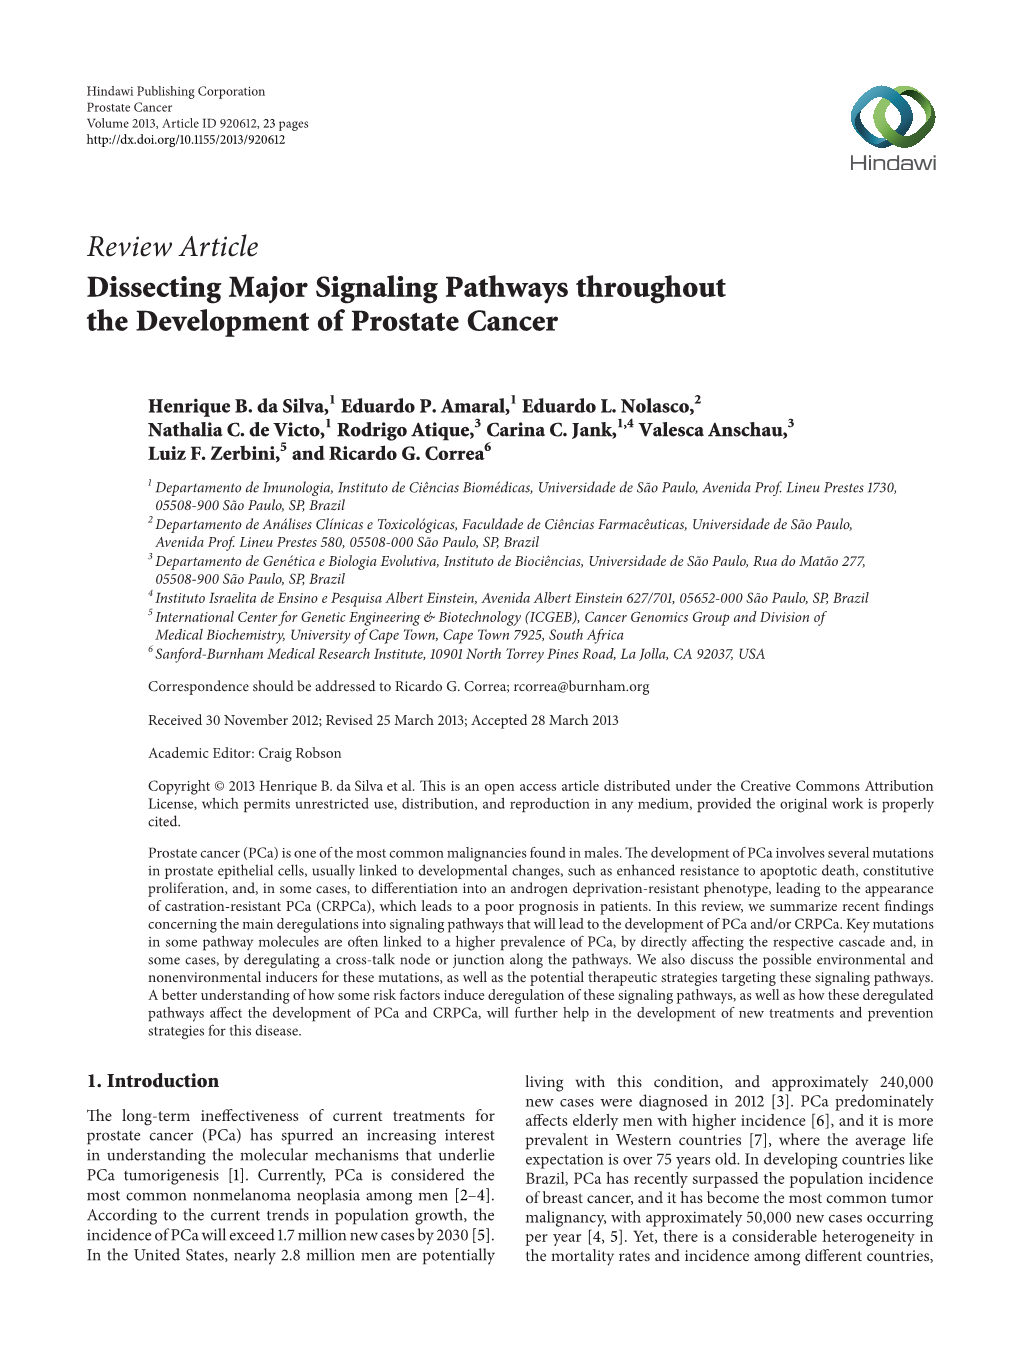 Dissecting Major Signaling Pathways Throughout the Development of Prostate Cancer